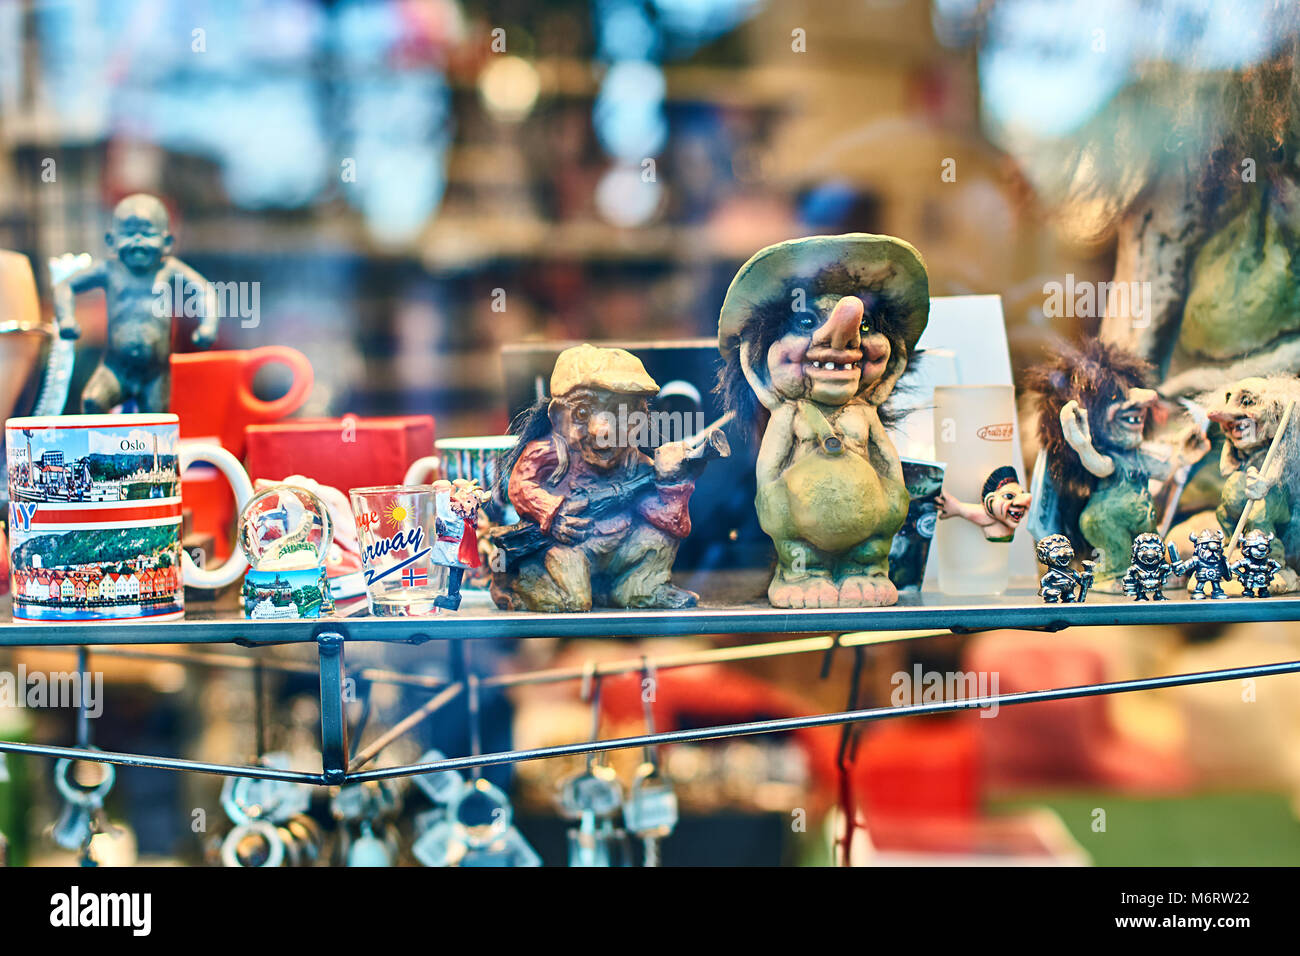 Traditional Norwegian troll figures at the display window of a souvenir gift shop. Stock Photo